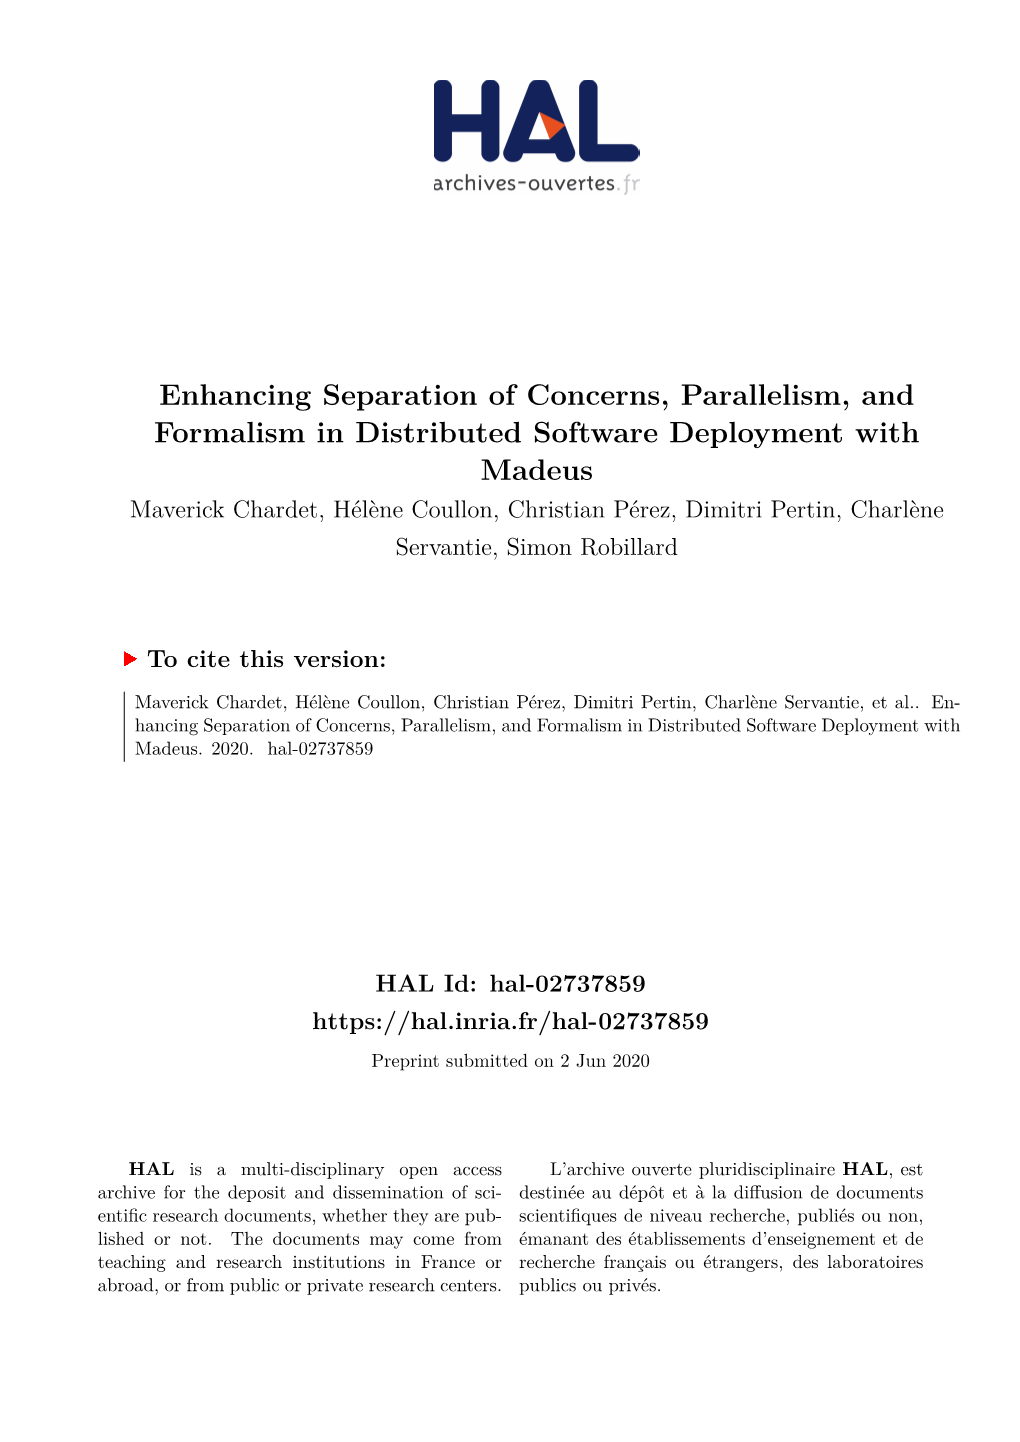 Enhancing Separation of Concerns, Parallelism, and Formalism In